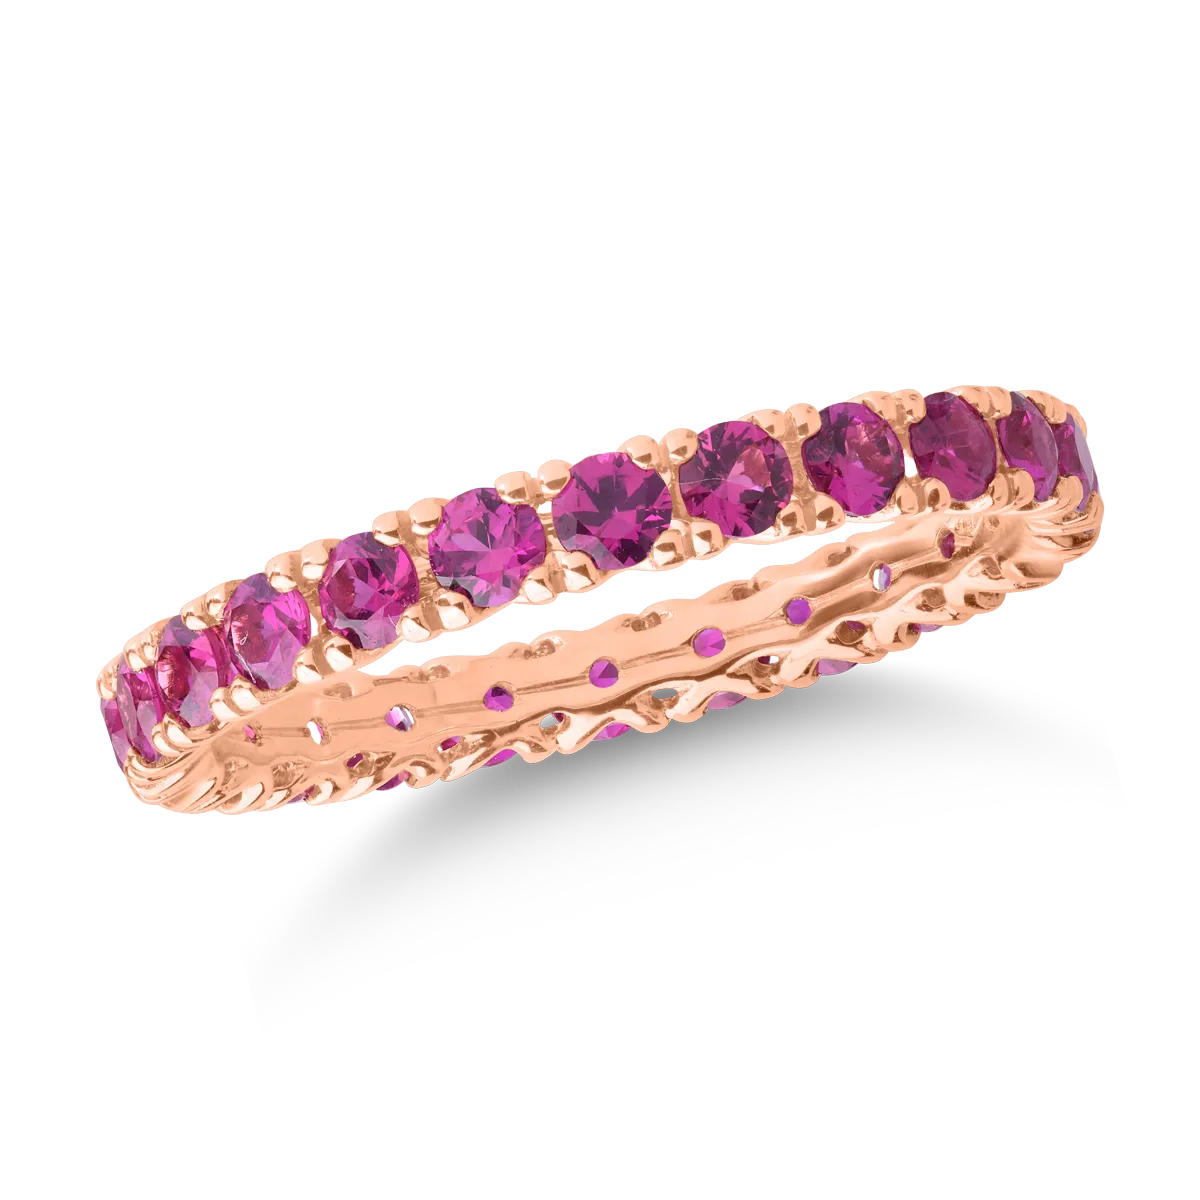 18K rose gold infinity ring with 1.65ct rubies